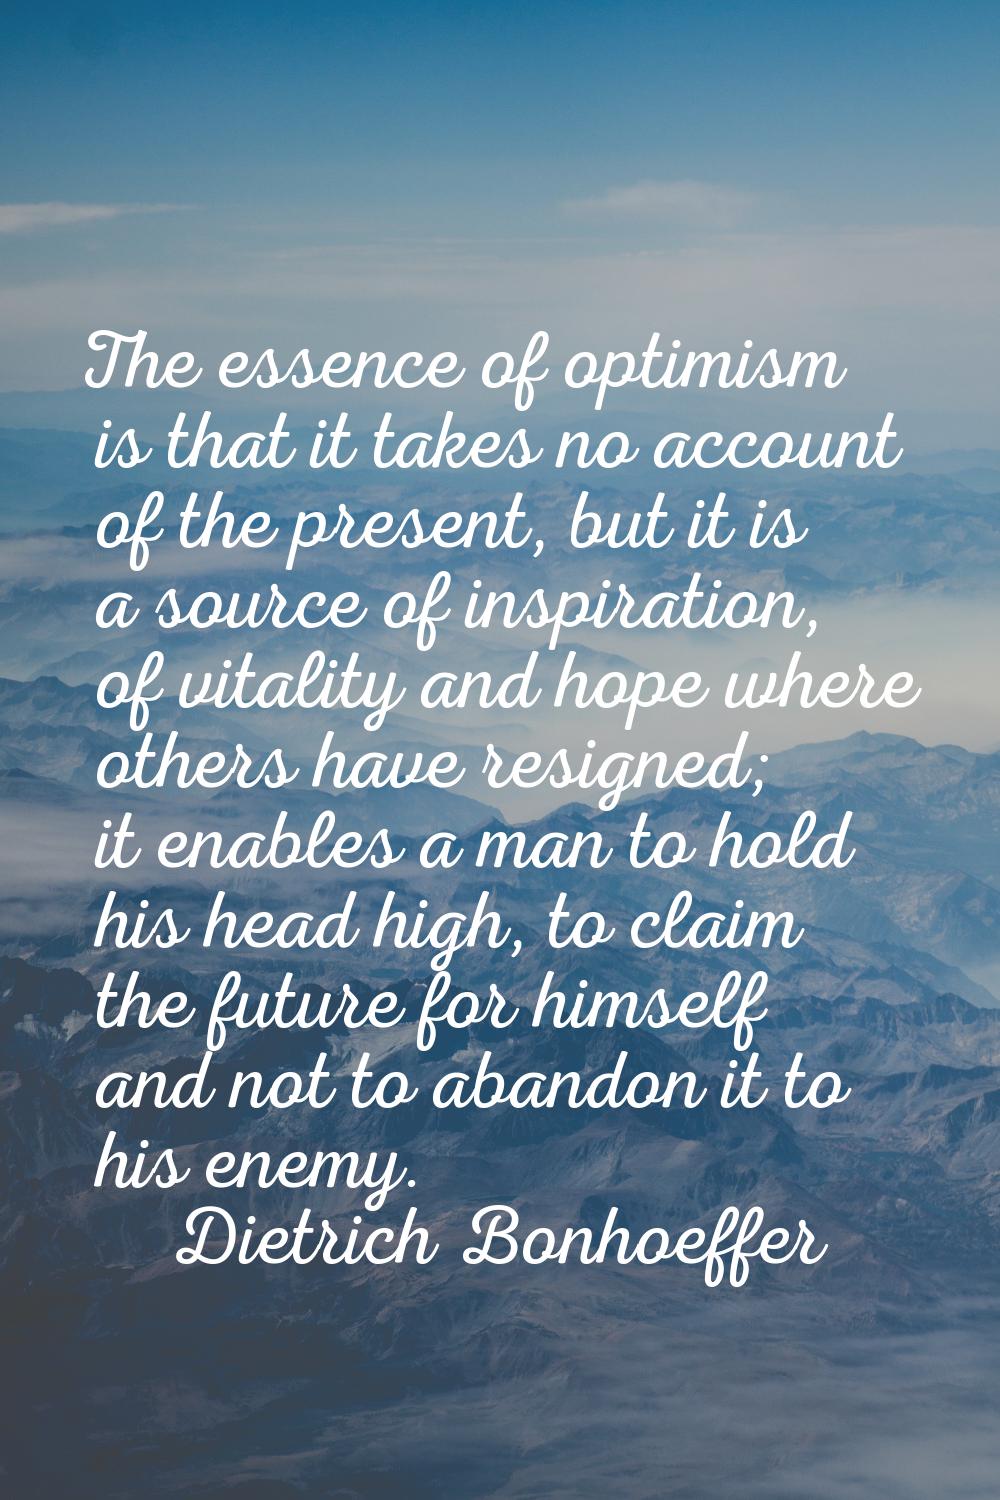 The essence of optimism is that it takes no account of the present, but it is a source of inspirati